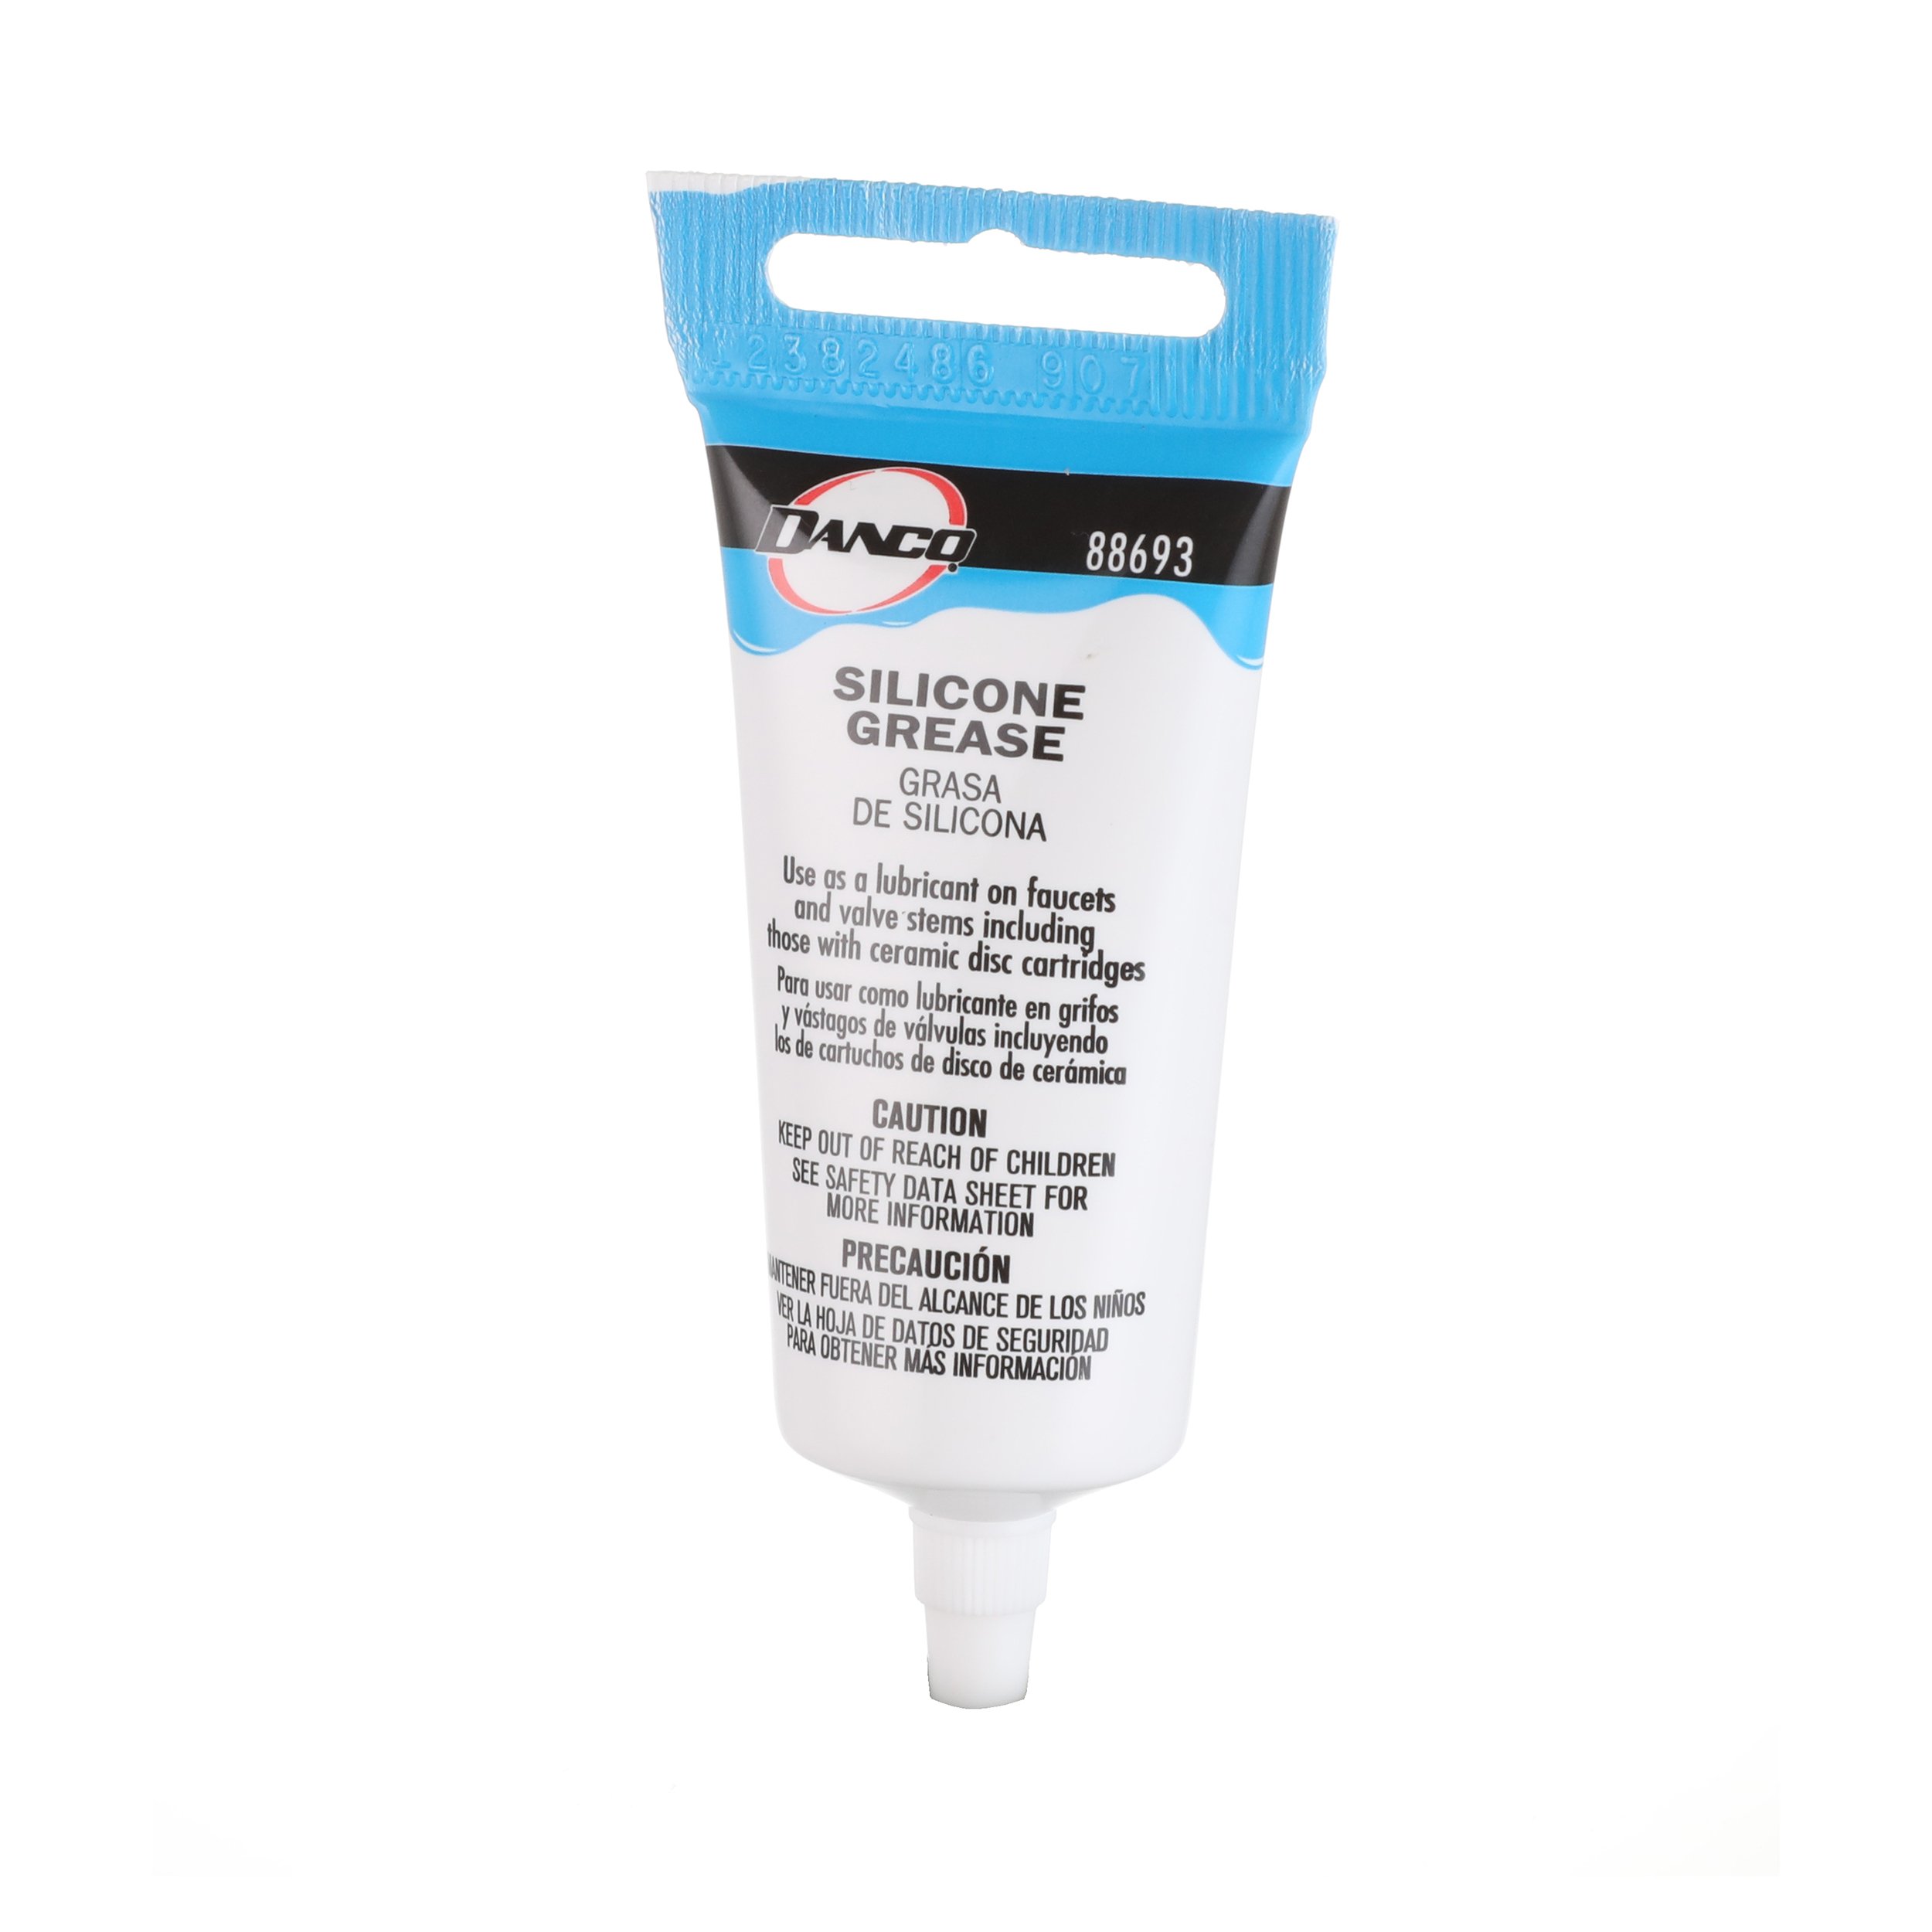 Plumbers Grease/Faucet Stem Lubricant, 1 oz